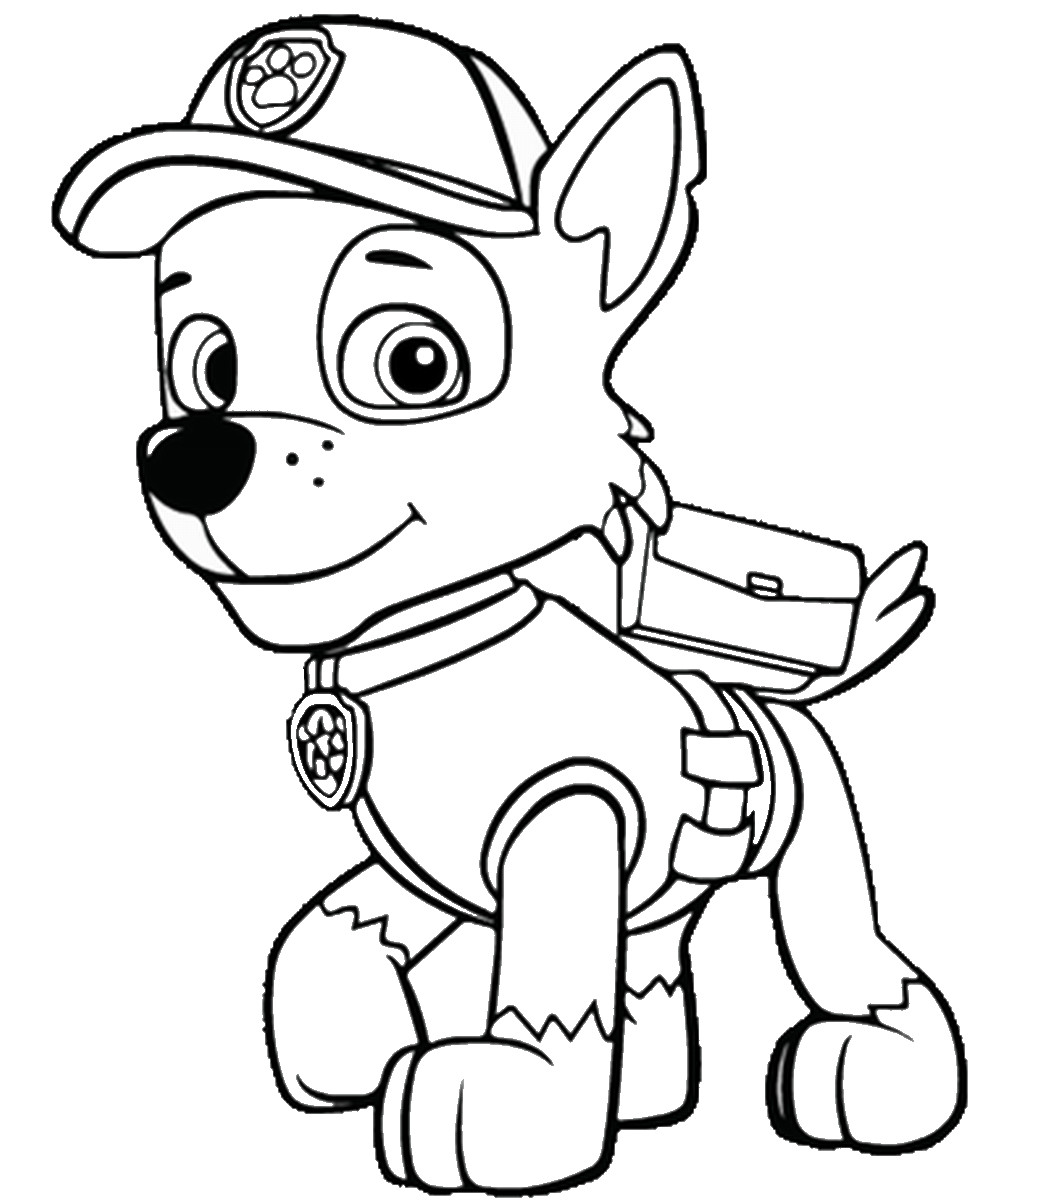 Printable Coloring Pages Paw Patrol
 Paw Patrol Coloring Pages